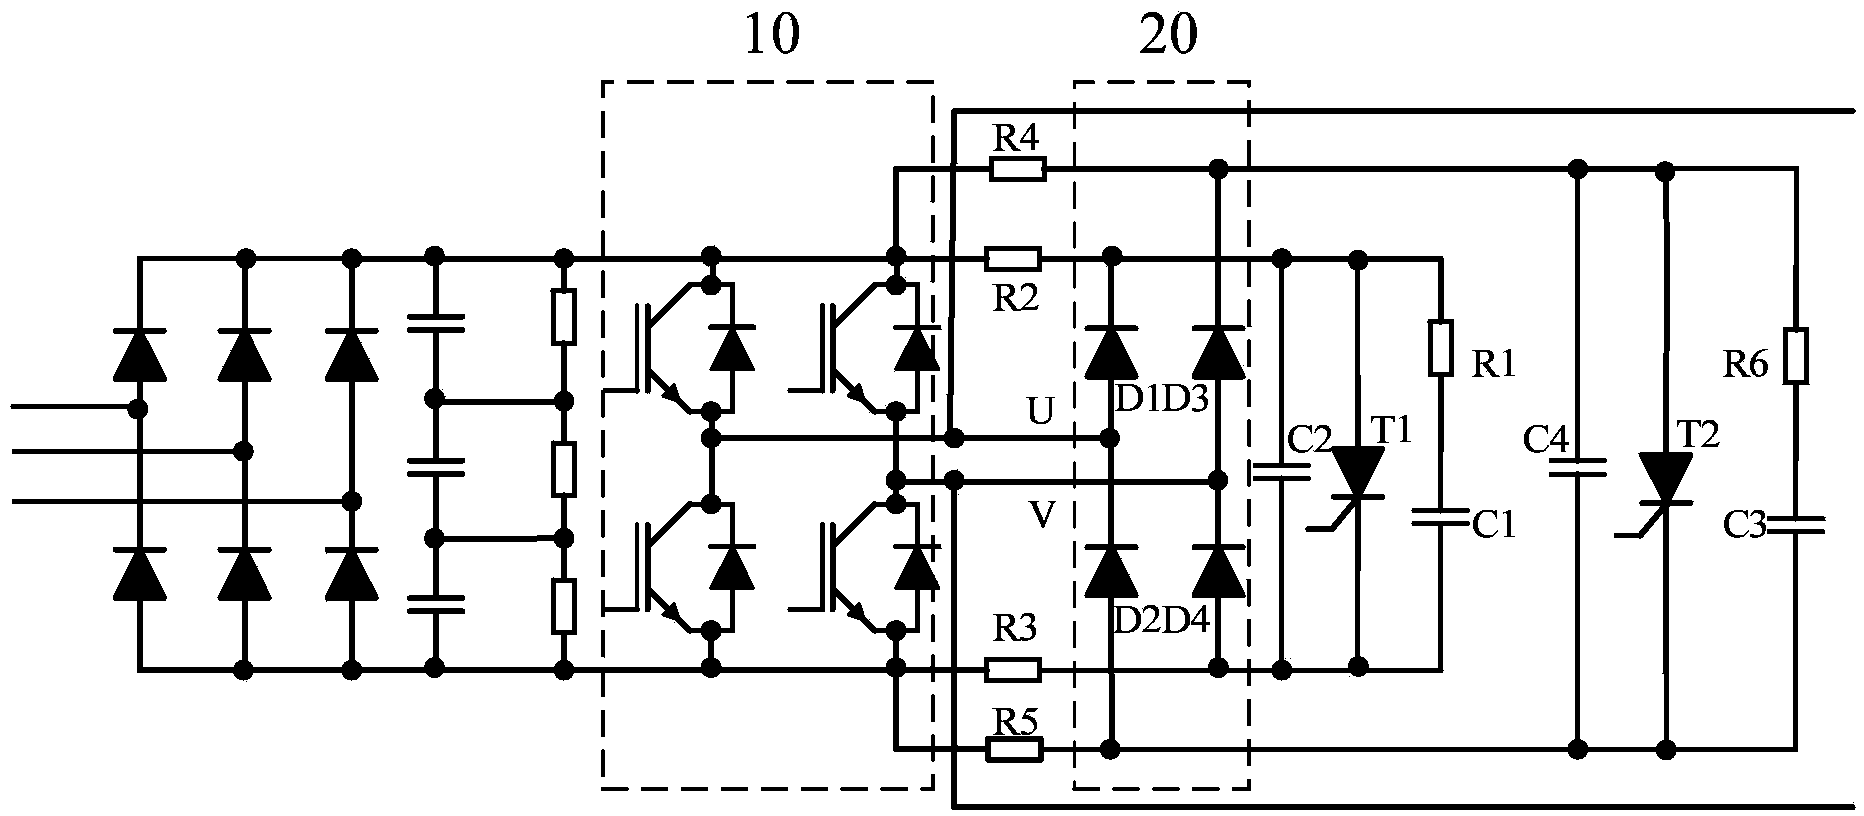 Current-sharing bypass circuit of power unit of high-voltage inverter